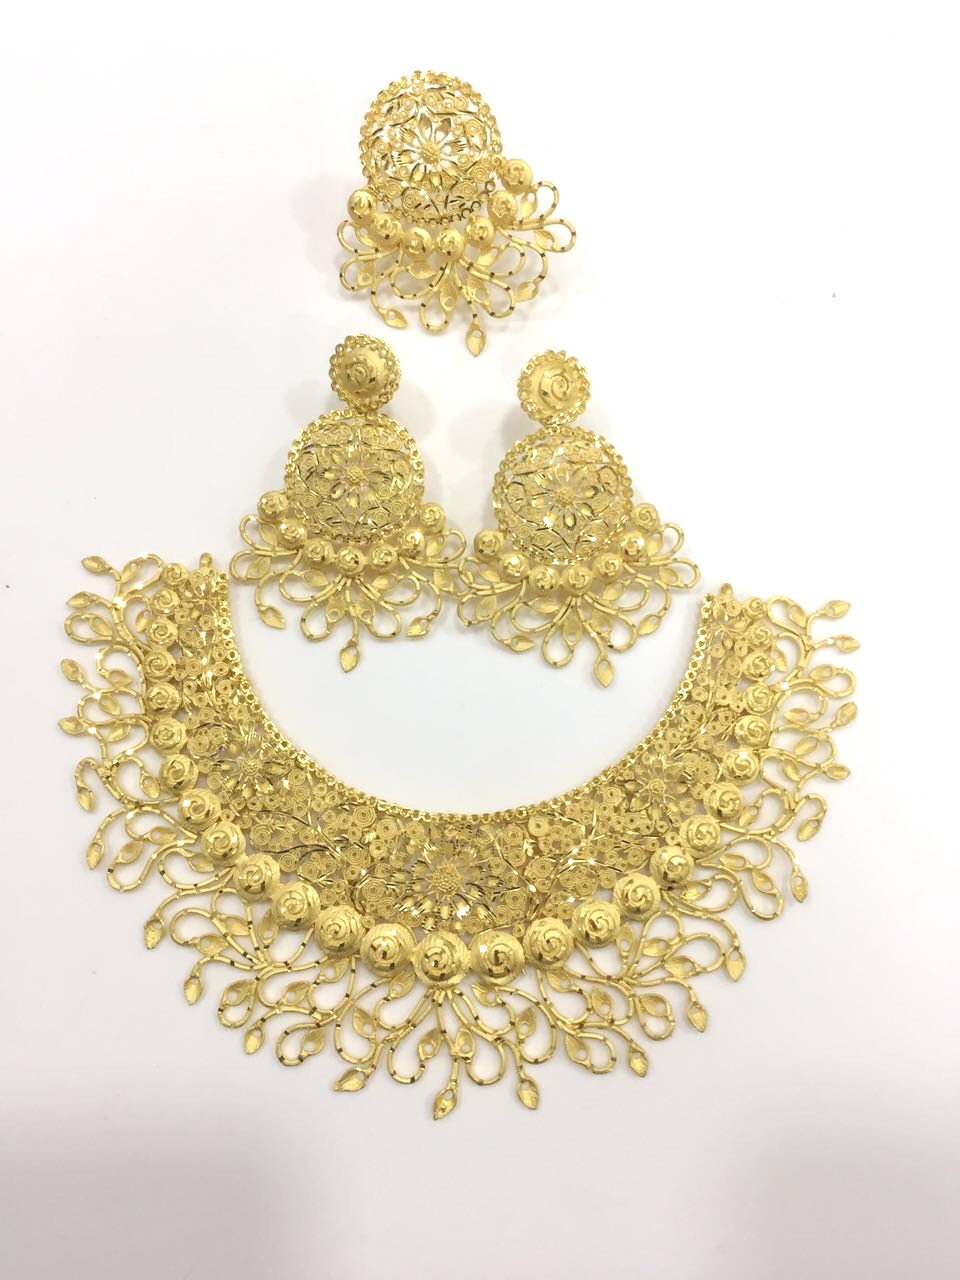 1 GM GOLD PLATED NECKLACE